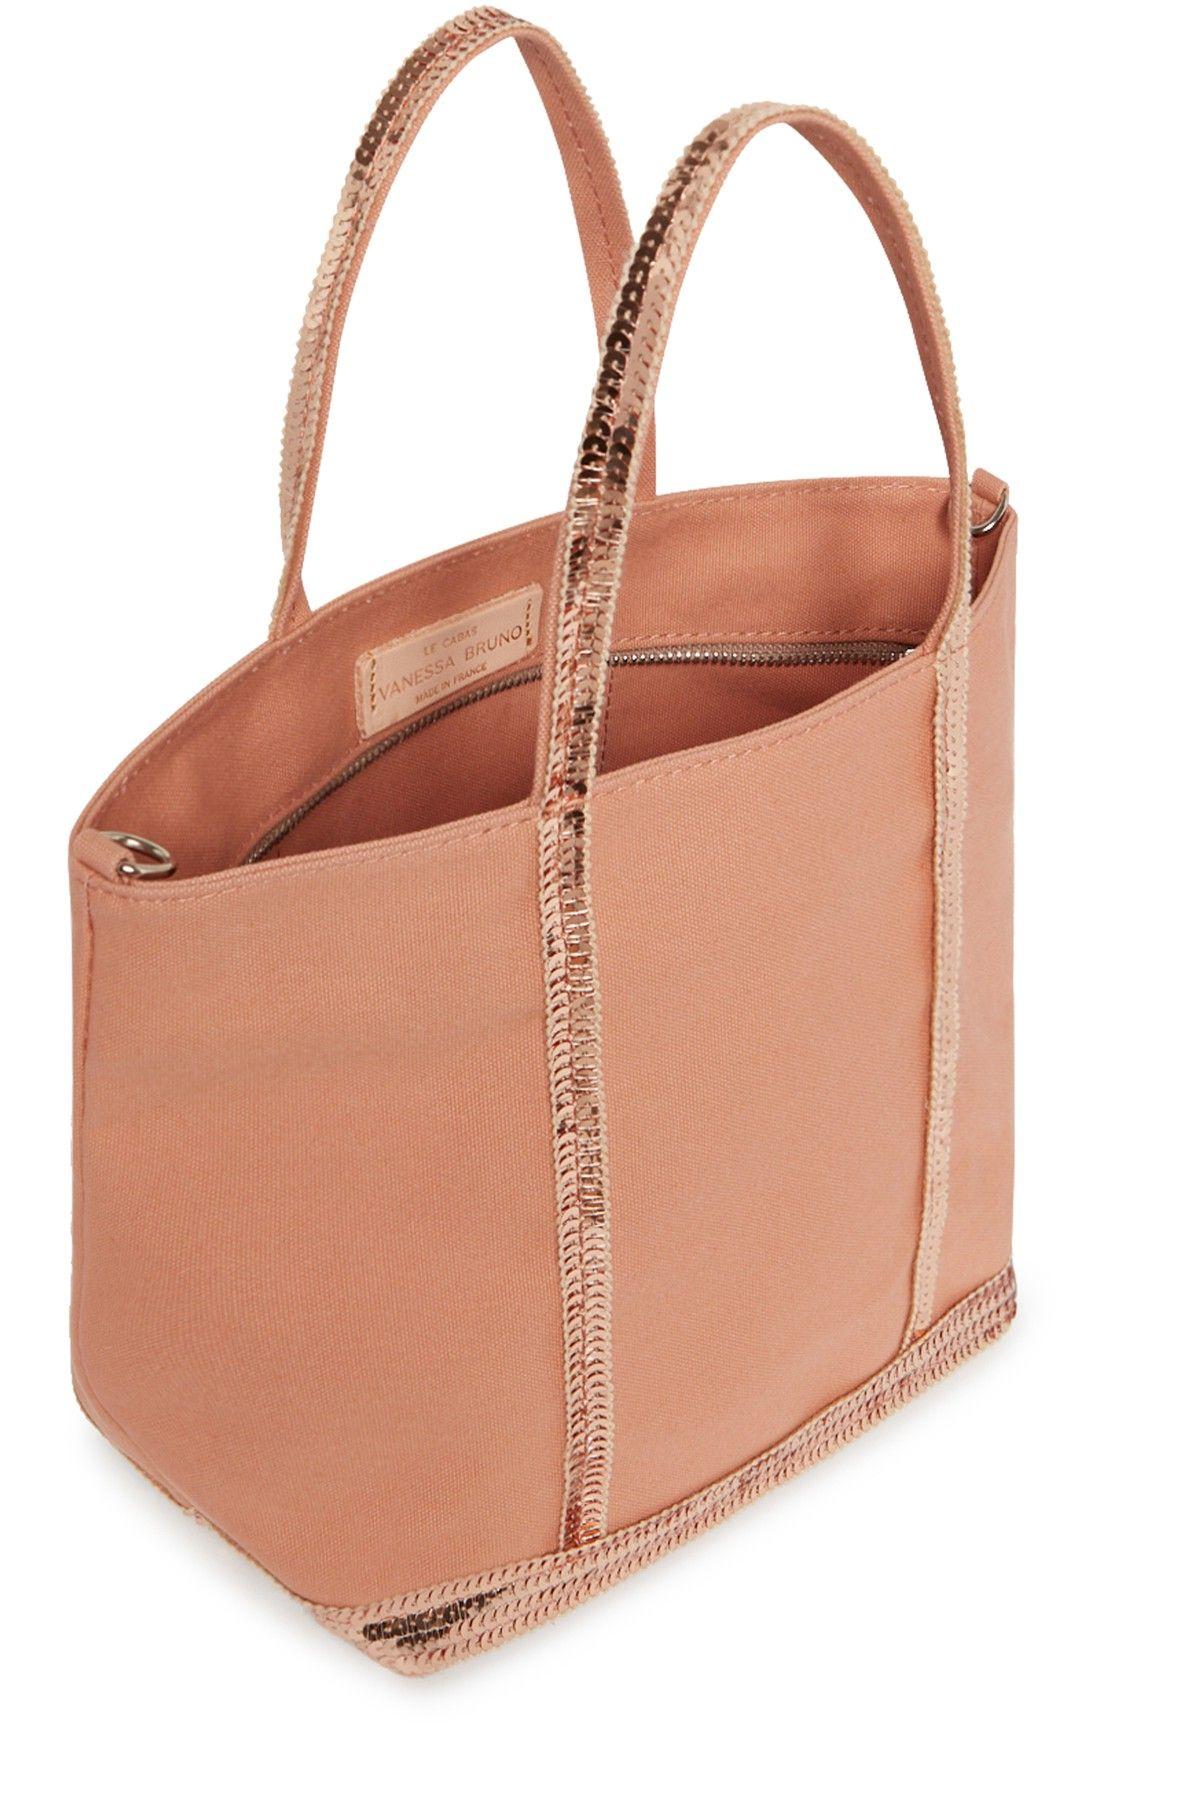 Vanessa Bruno Small Canvas And Sequins Cabas Tote Bag in Natural | Lyst